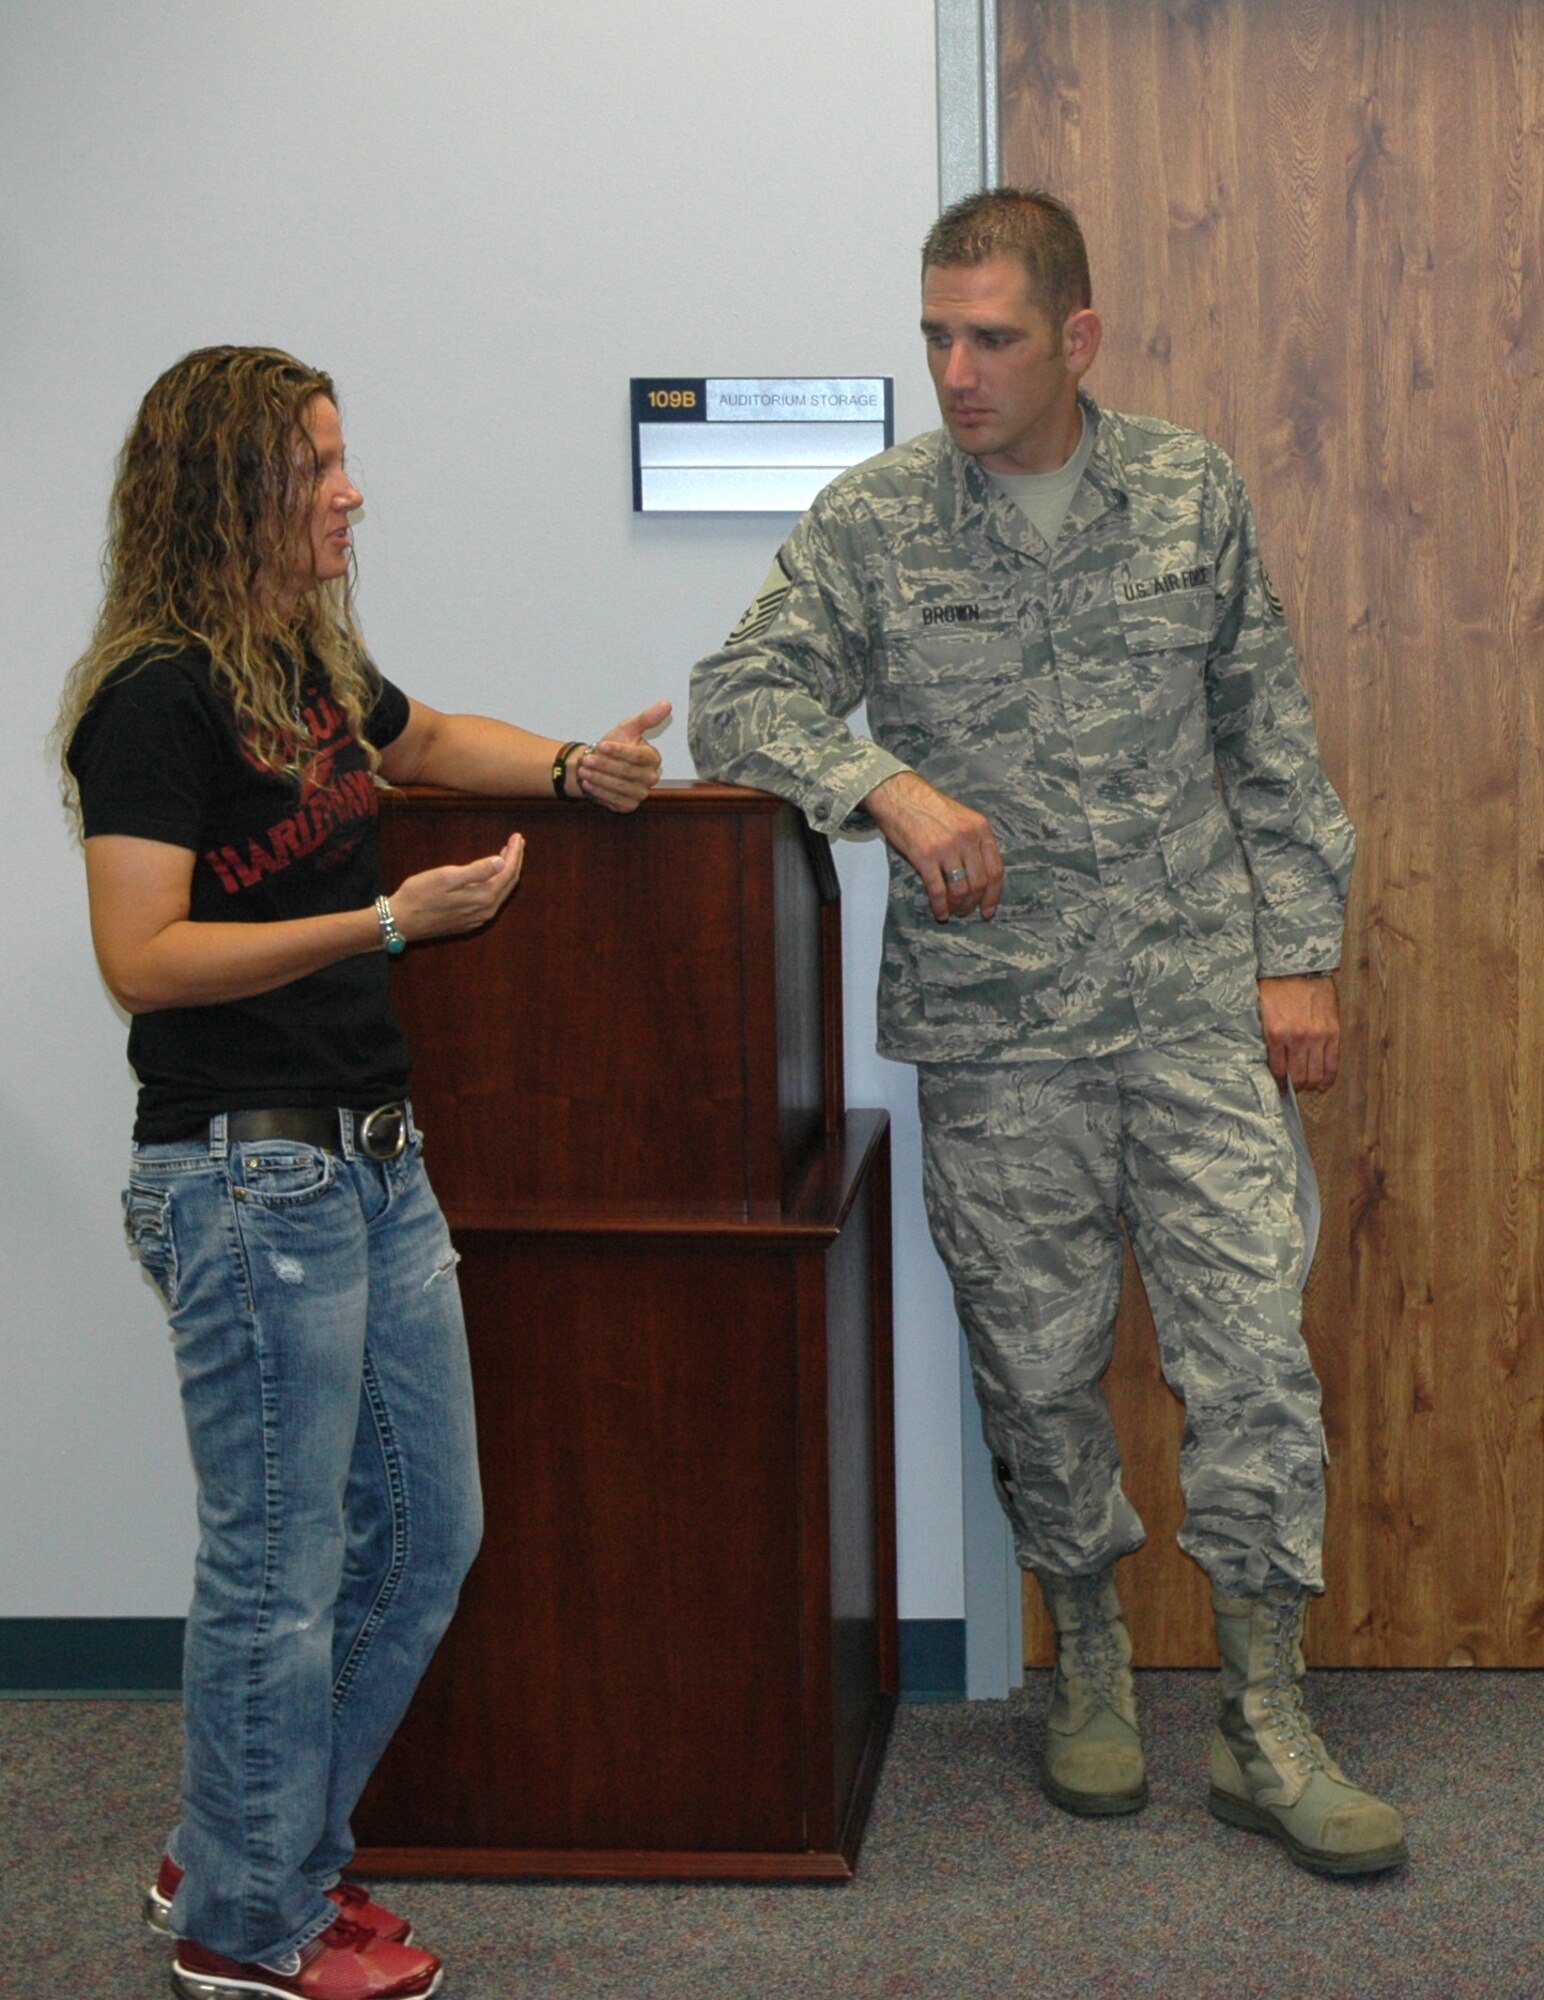 Air Force Master Sgt. Christopher Brown (right), a first-year recruiter for the 446th Airlift Wing, McChord Field, Wash. speaks with Air Force Staff Sgt. Jennifer Eldridge, Sept. 16, 2011. Eldridge was the 72nd person he had enlisted this year, which put him into the Century Club. The Century Club is when a recruiter exceeds his goals at a minimum of 150 percent. Brown is currently at 225 percent. (U.S. Air Force photo by Sandra Pishner)